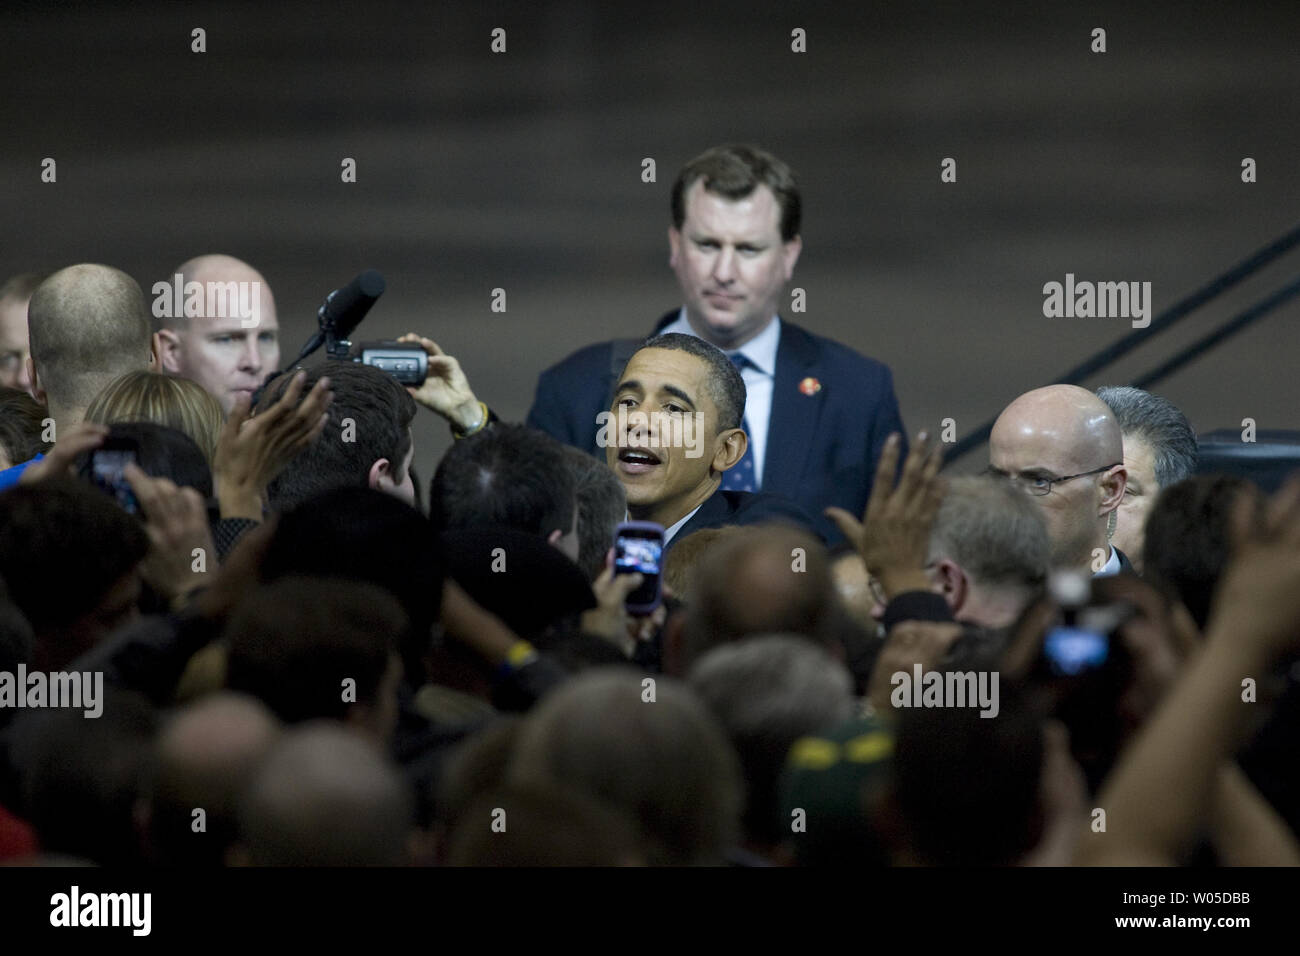 President Barack Obama greets Boeing employees after speaking about his blueprint for an economy built to last, based on American domestic manufacturing and promoting American exports,  at the aerospace giant's assembly facility in Everett, Washington on February 17, 2012. Later Obama will be attending two fund raising events for his re-election campaign.   UPI/Jim Bryant Stock Photo